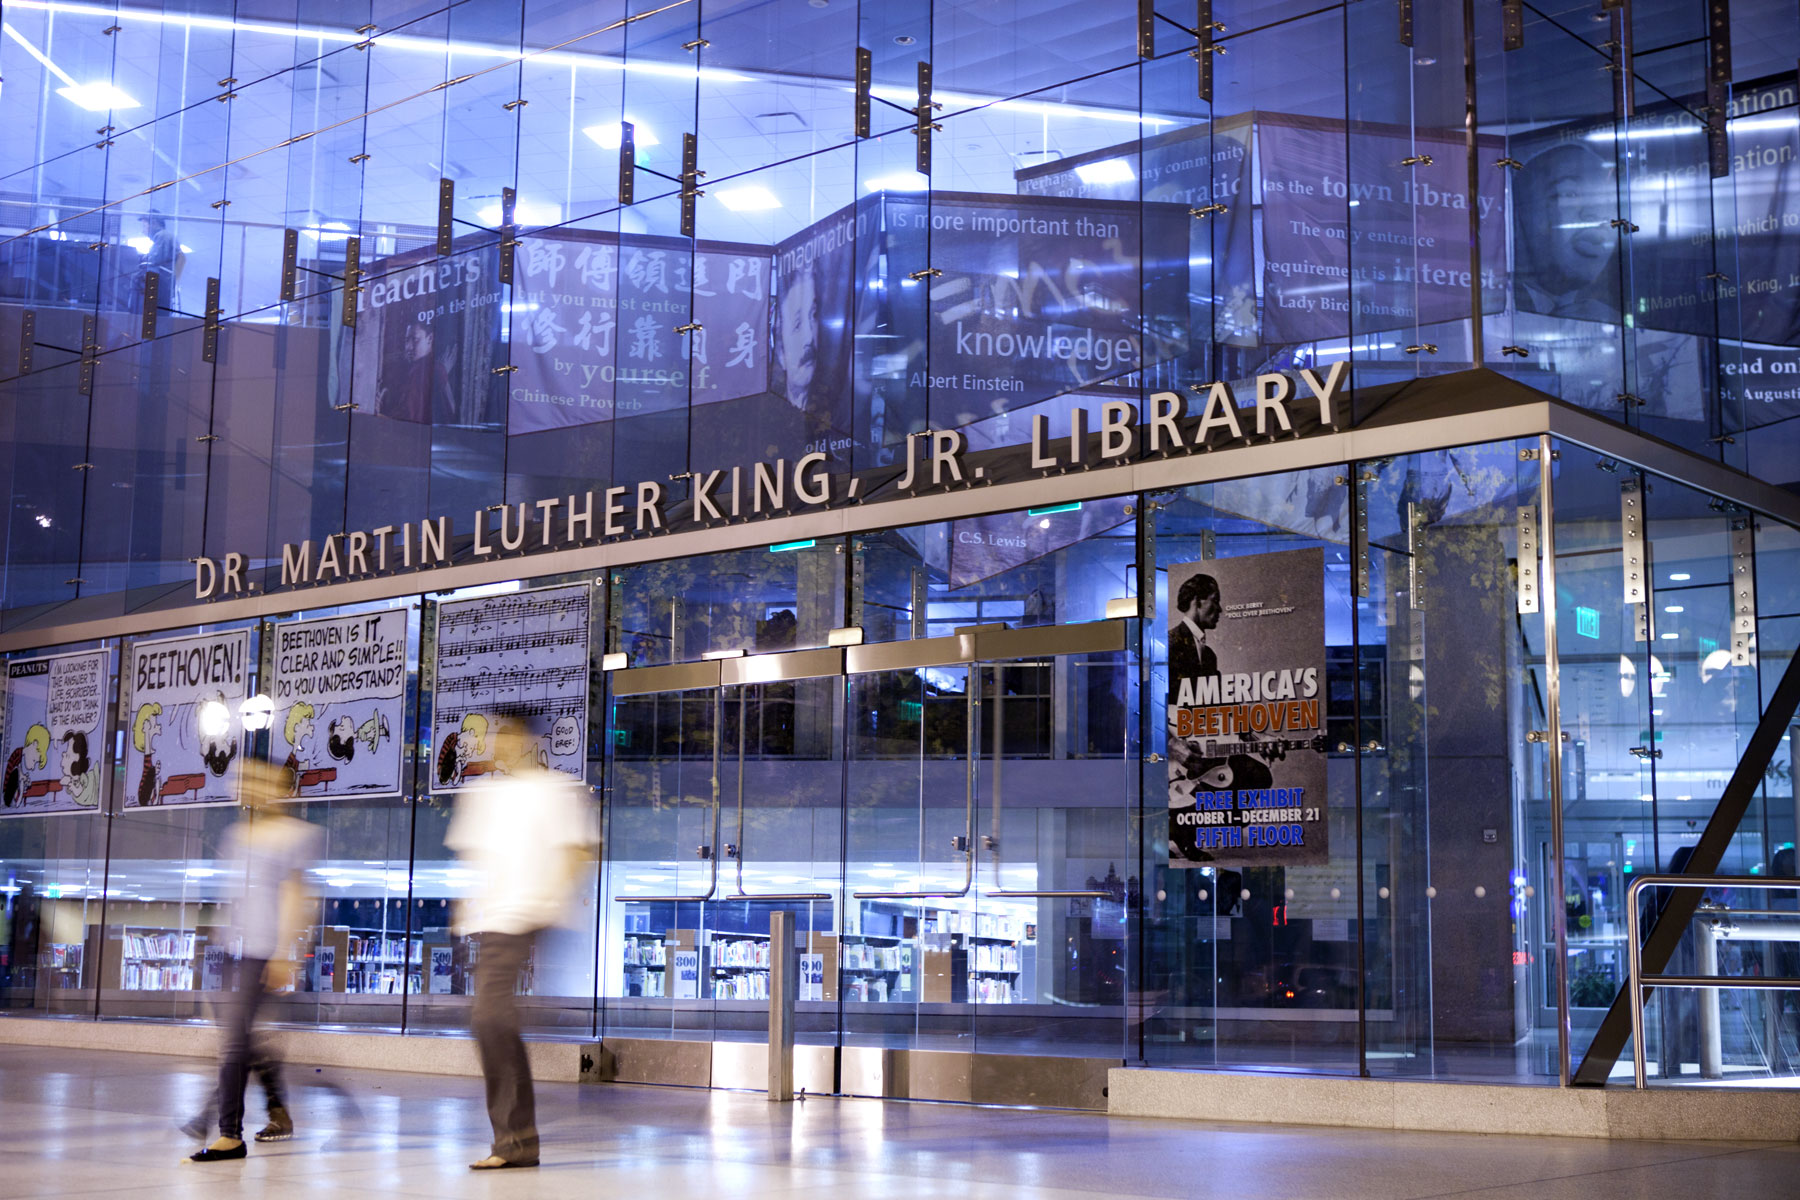 Dr. Martin Lutehr King, Jr. Library